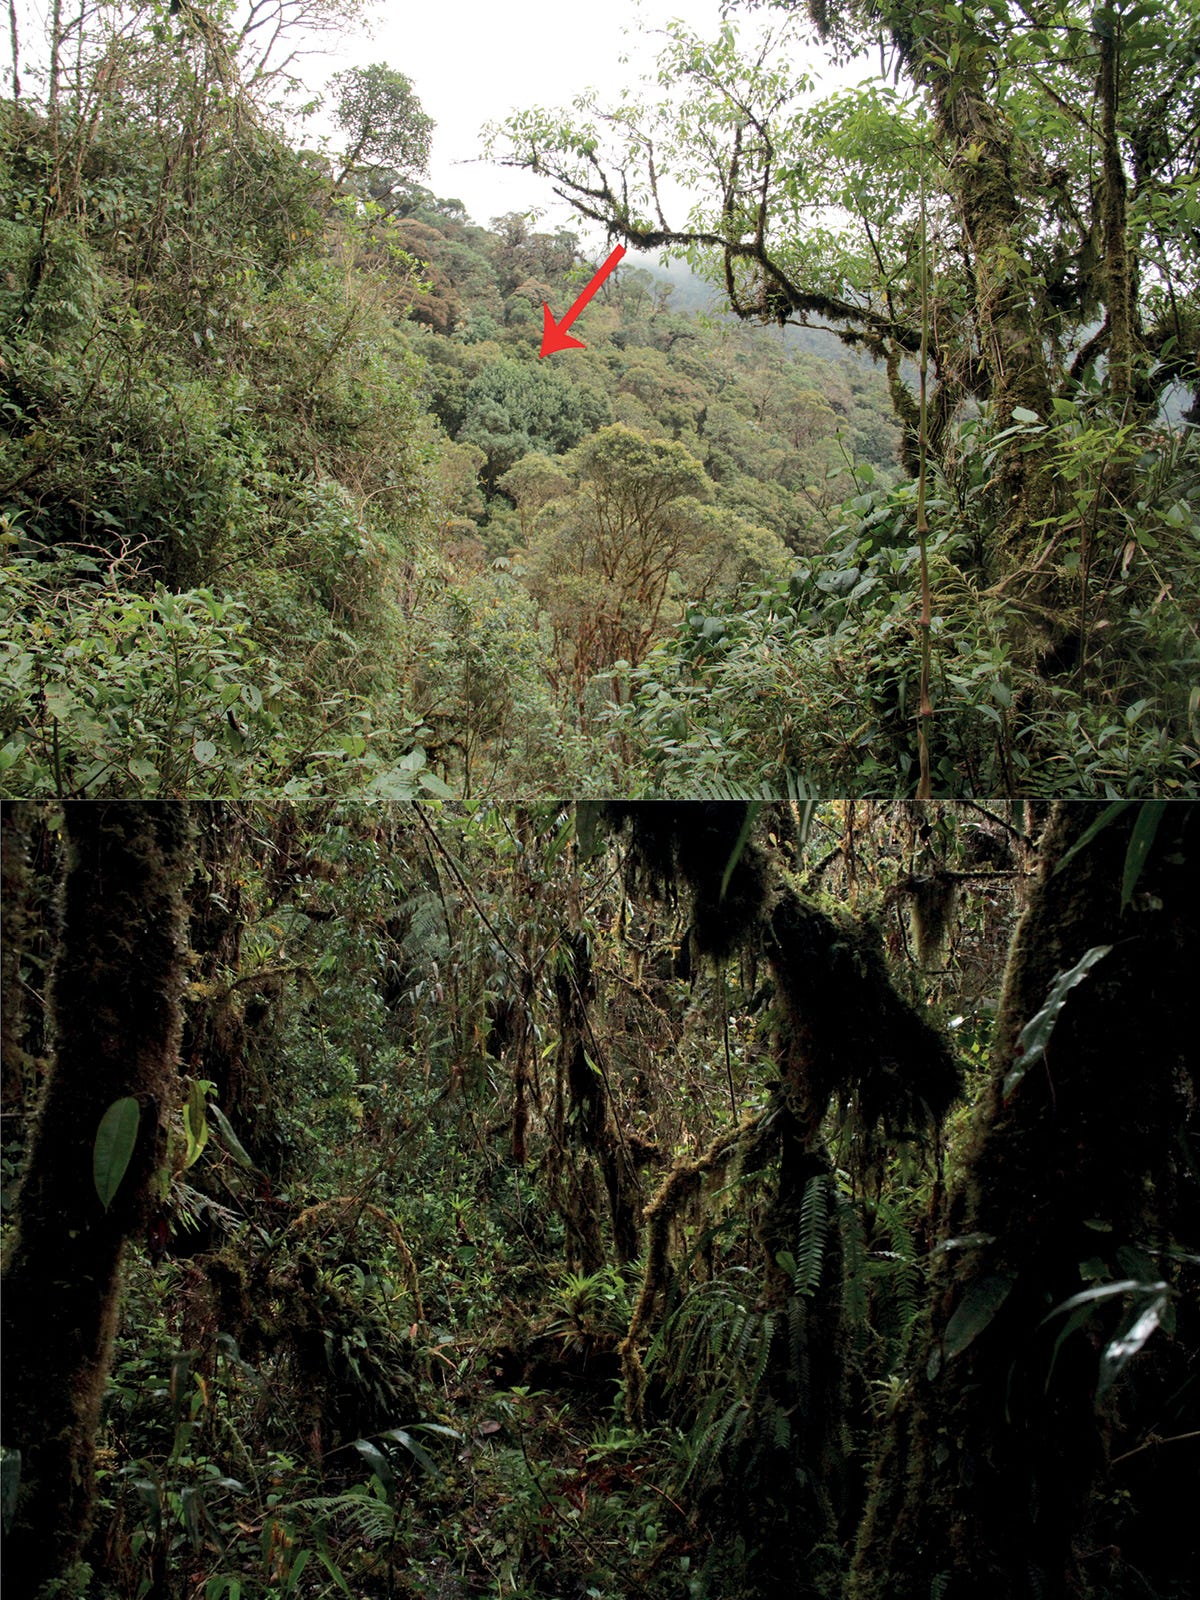 An image on top shows a zoomed-out view of the park, an arrow indicating where the team found the frog. On the bottom is the inside of the forest where the frog hangs out.